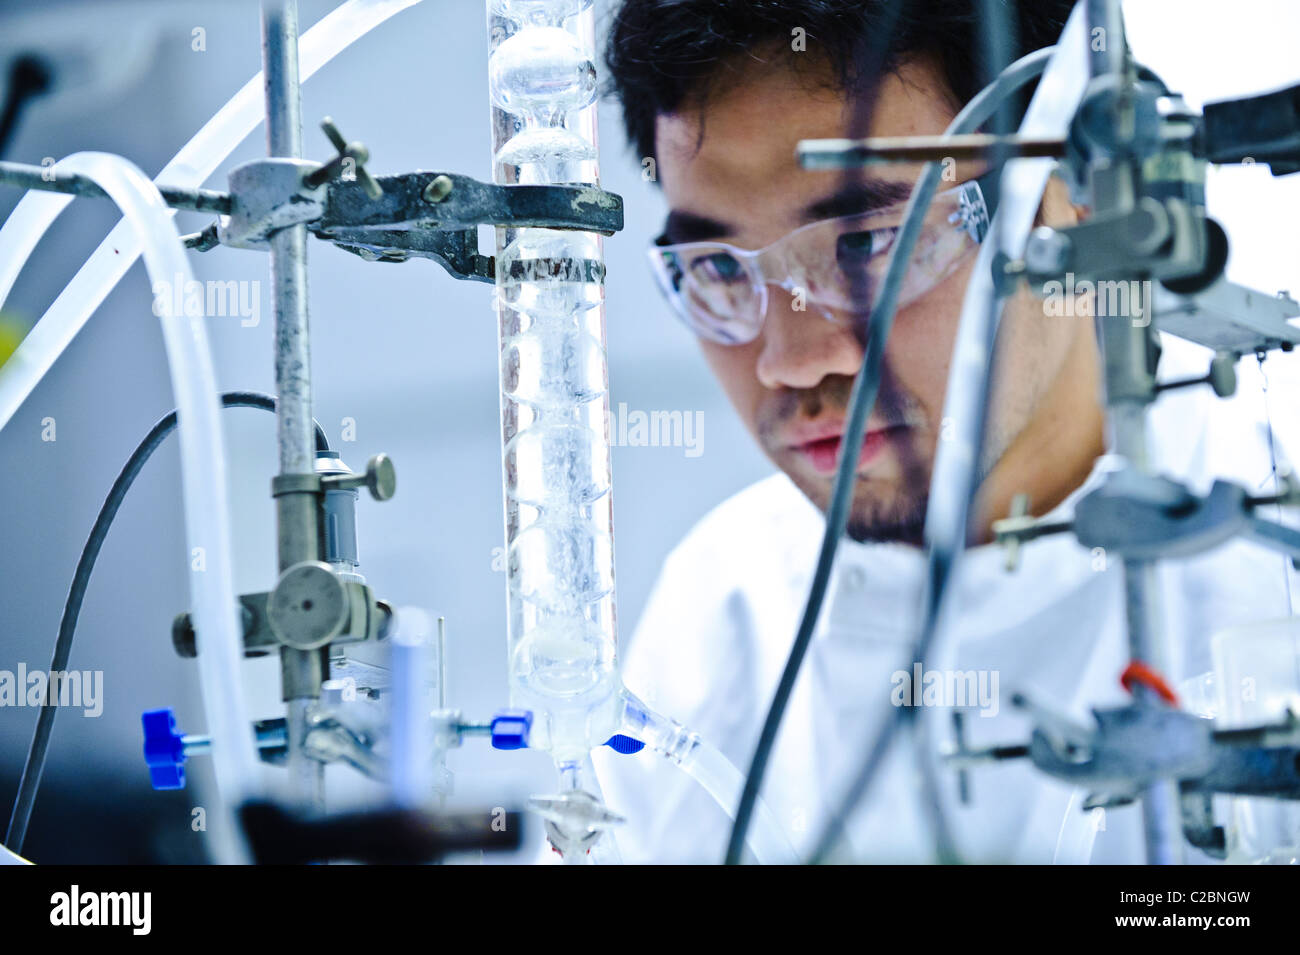 Young Asian male scientist wearing clear goggles and white science coat looking at glass tube apparatus in science lab Stock Photo